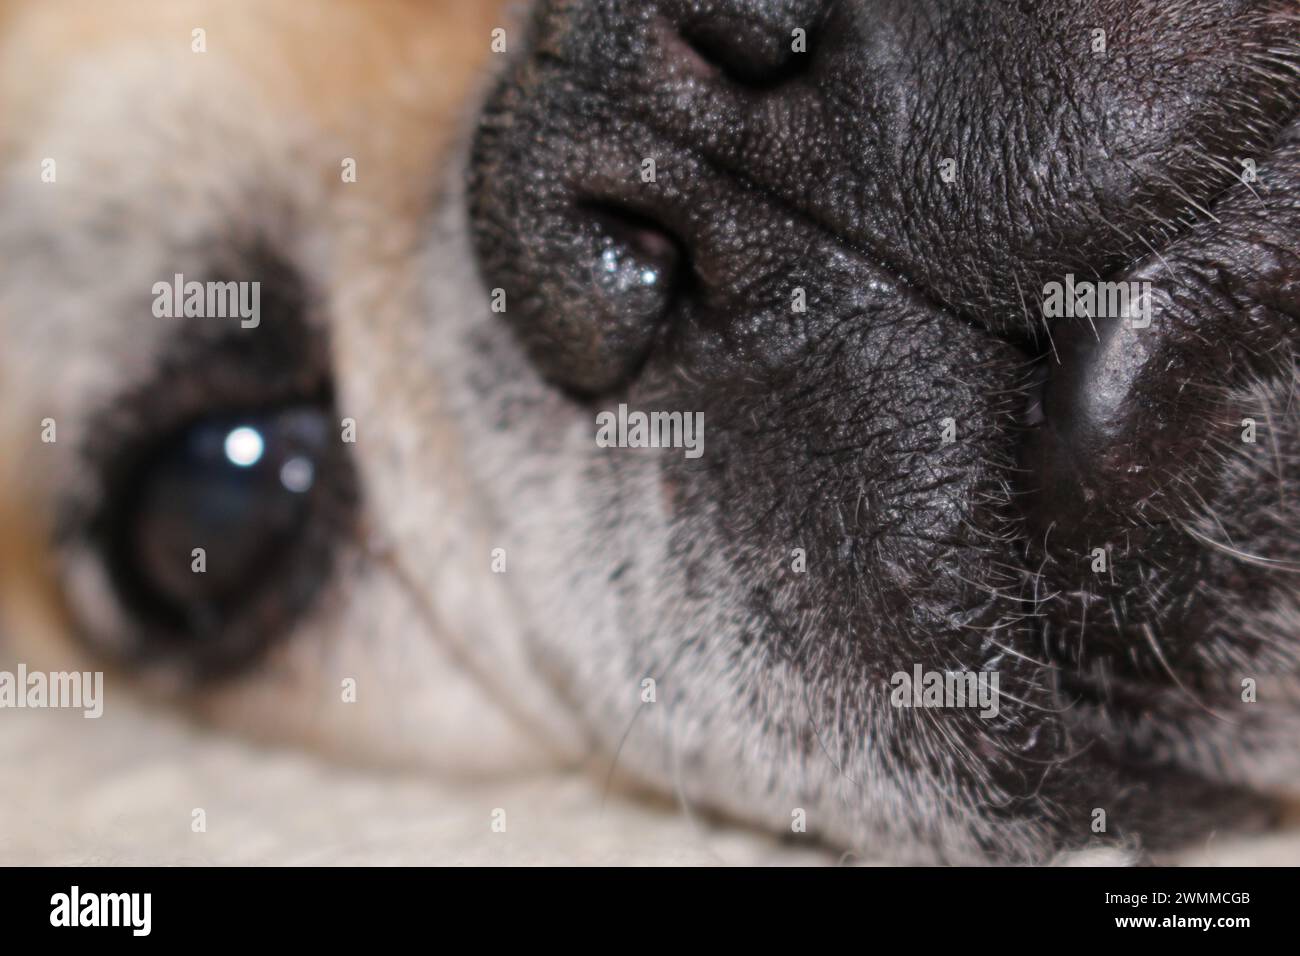 Extreme close up portrait of part of an old French Bulldog's face, lying down looking very sad upset moody melancholy dejected sorrowful disconsolate Stock Photo